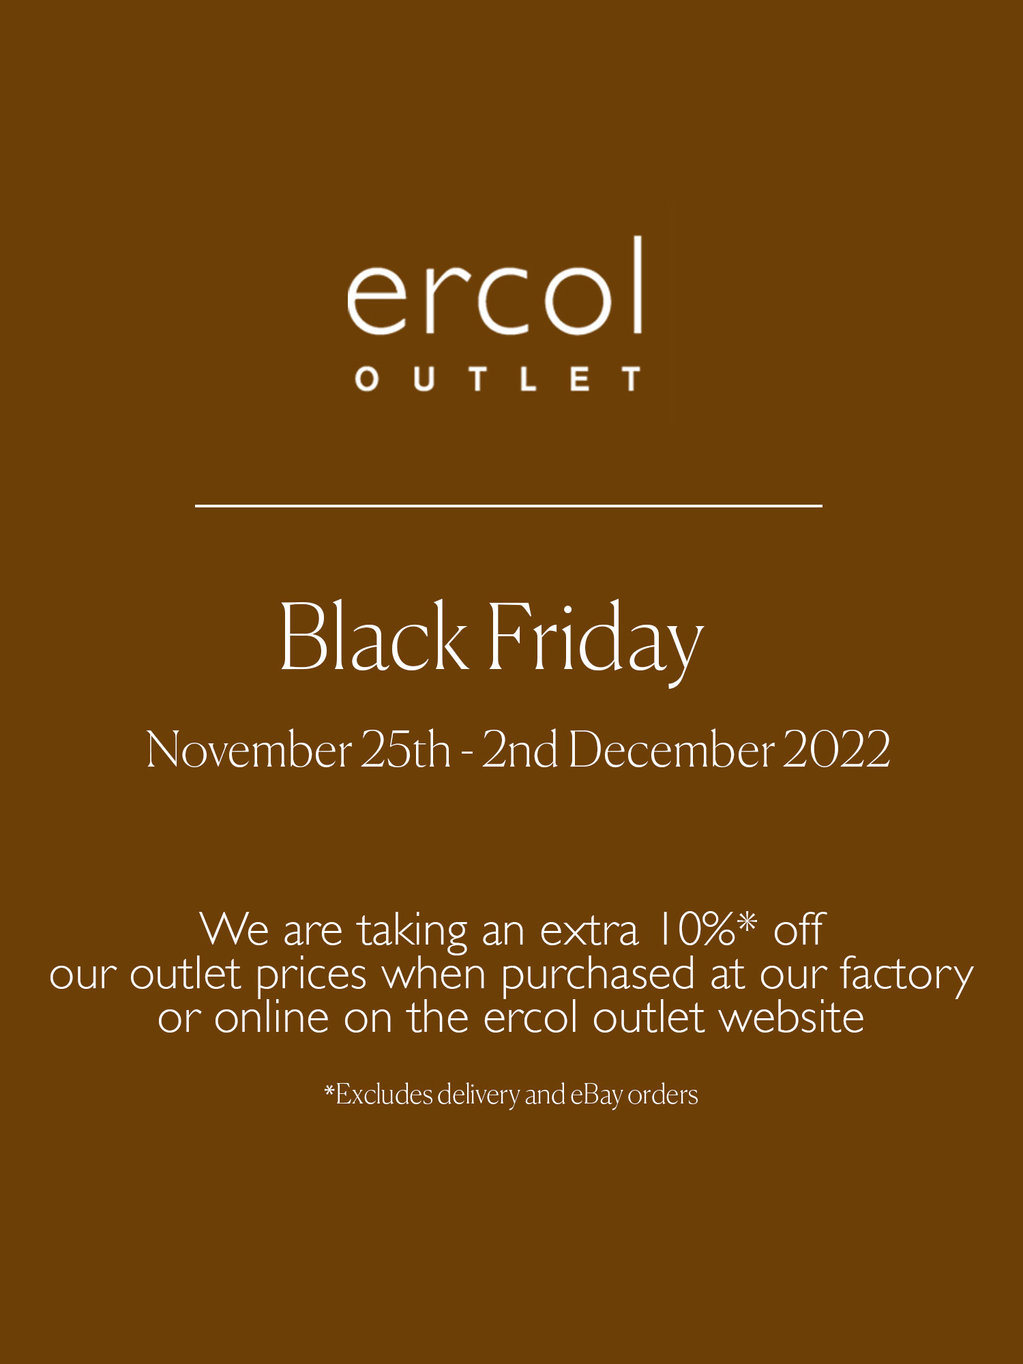 Black Friday November 25th - 2nd December 2022.  We are taking an extra 10% off our Outlet prices when purchased at our factory or online on the ercol outlet website. Excludes delivery and eBay orders.